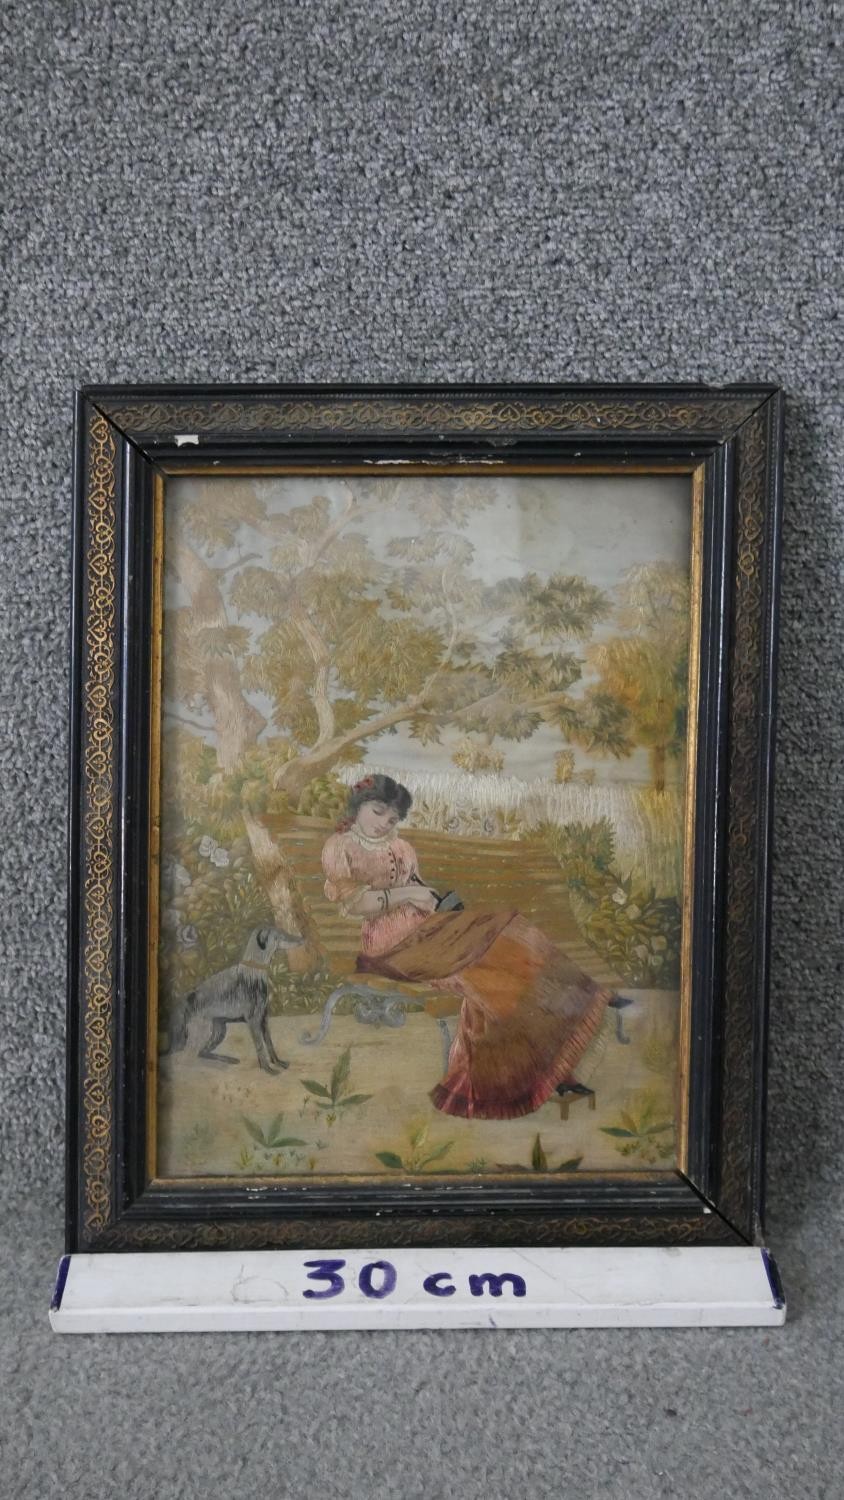 A framed and glazed 19th century Italian silk work embroidery of a lady sitting on a bench with - Image 3 of 4